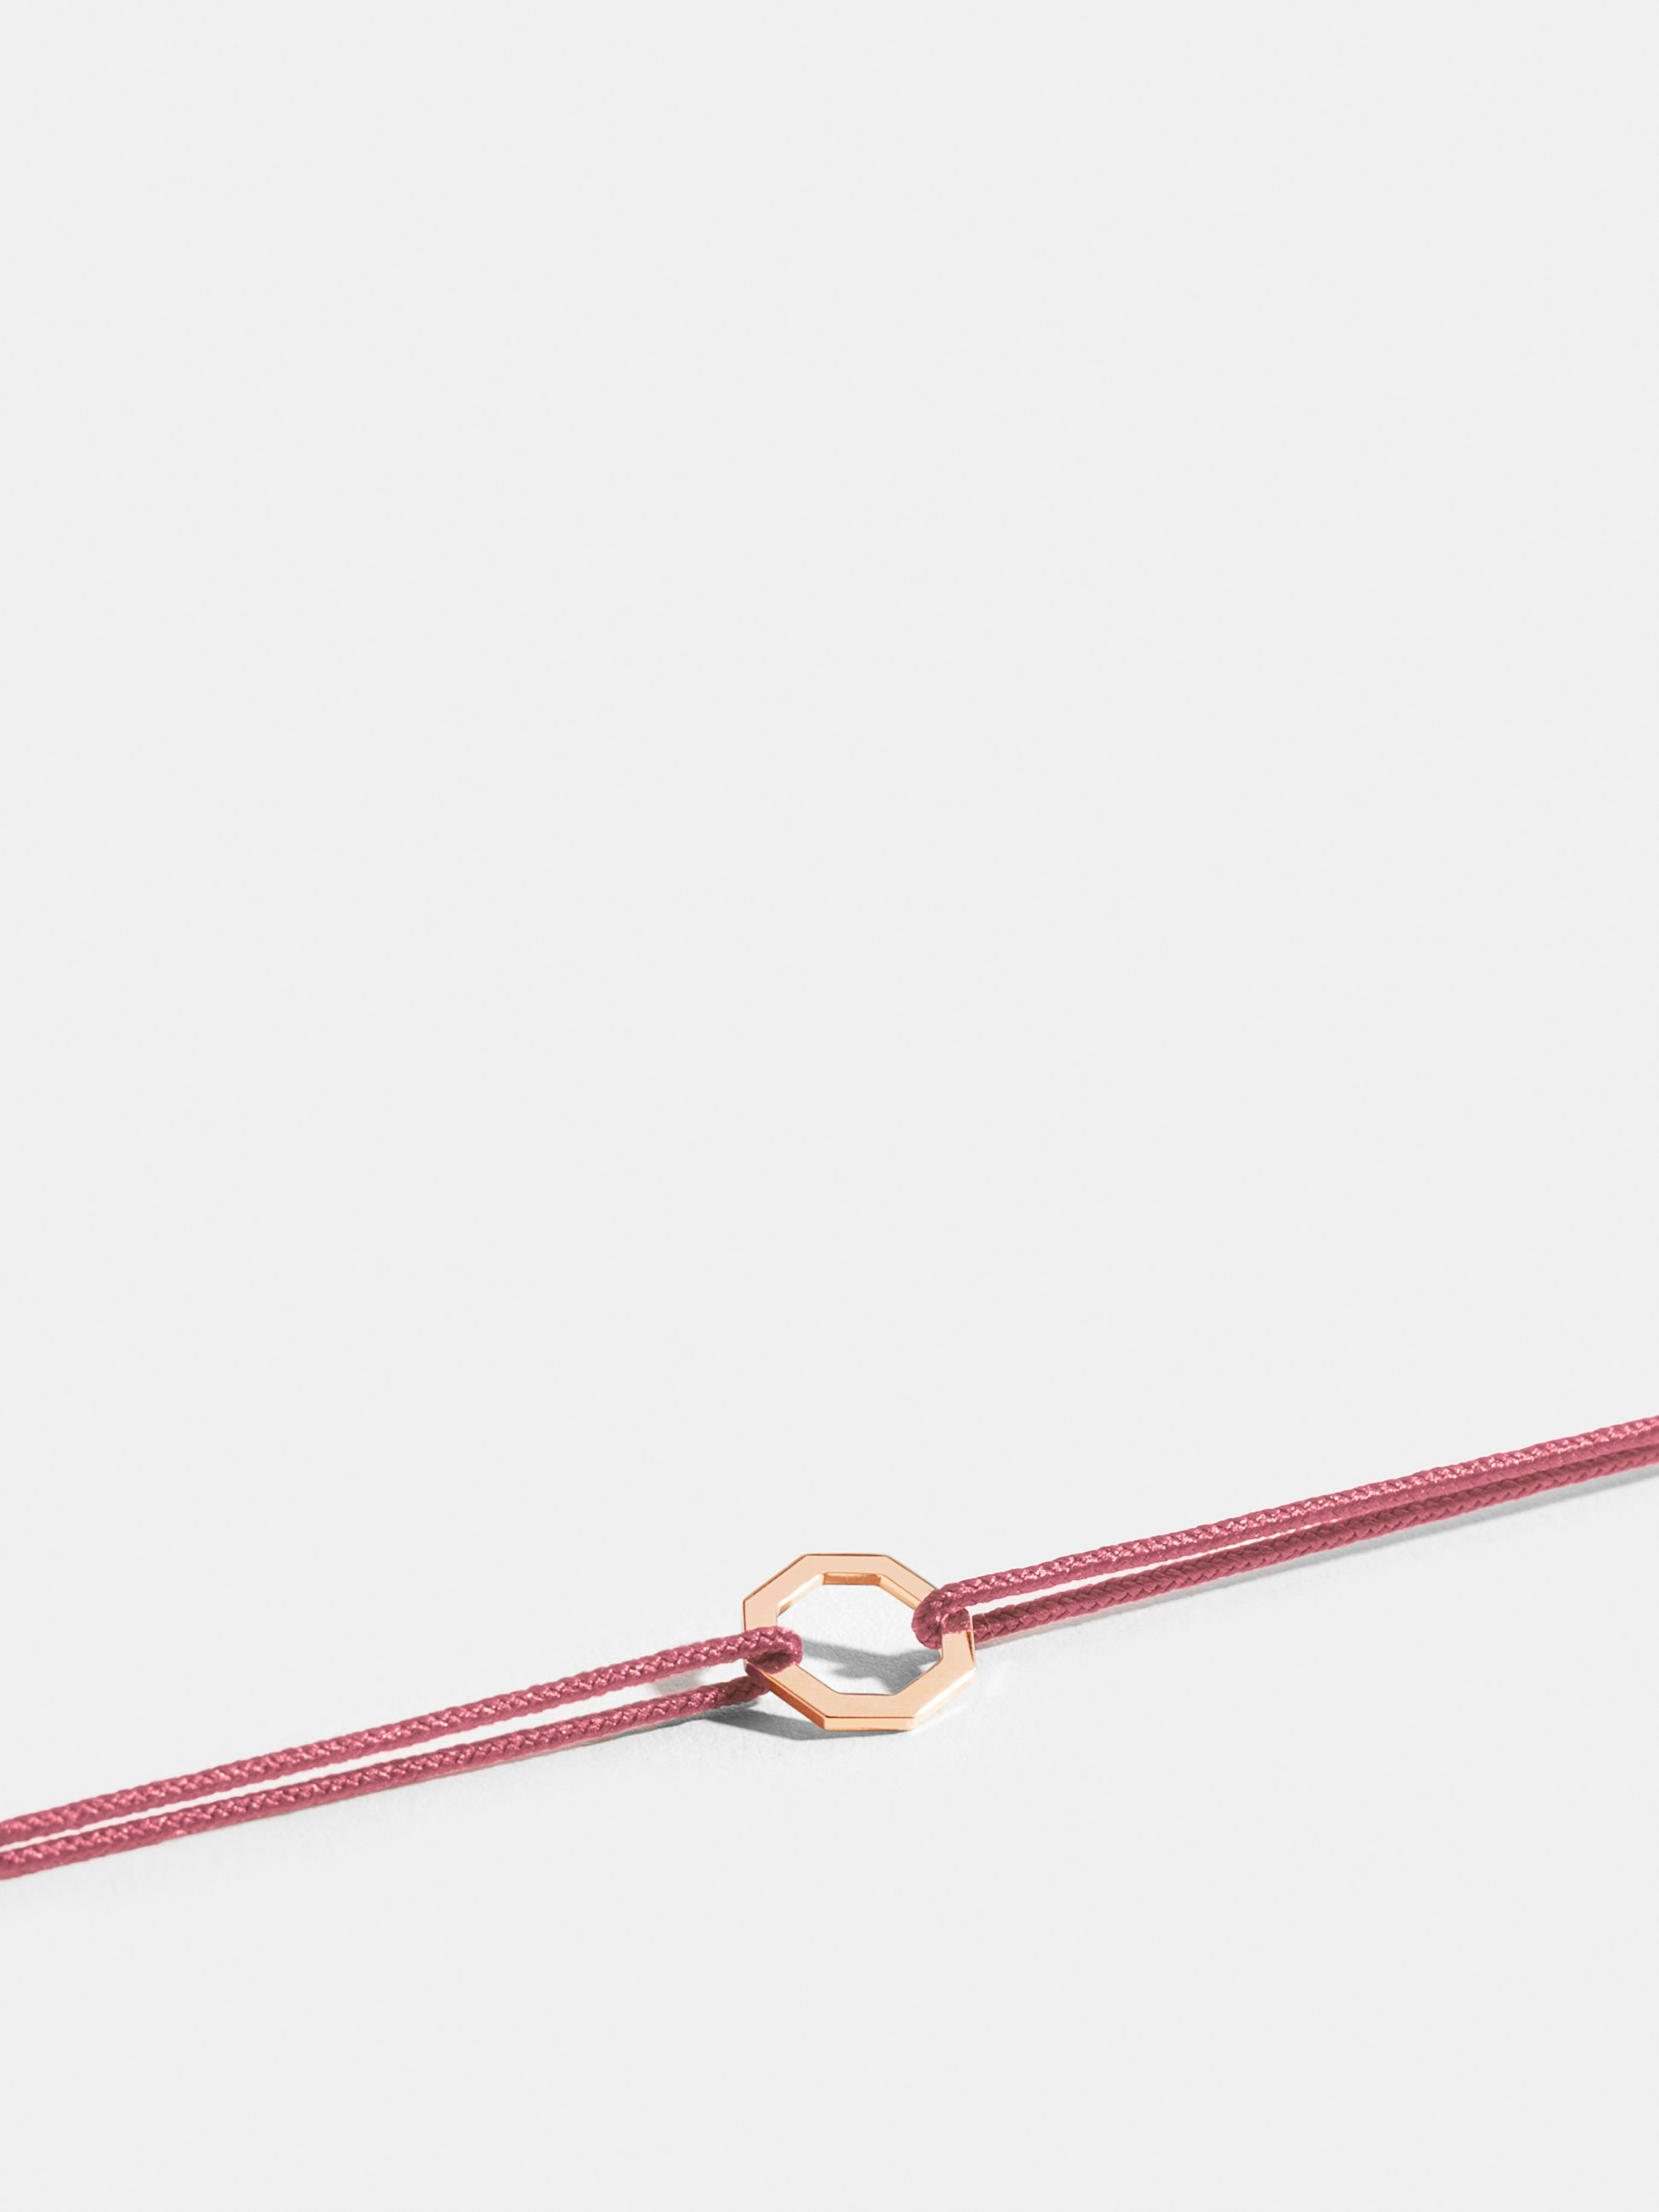 Octogone motif in 18k Fairmined ethical rose gold, on an antique pink cord. 